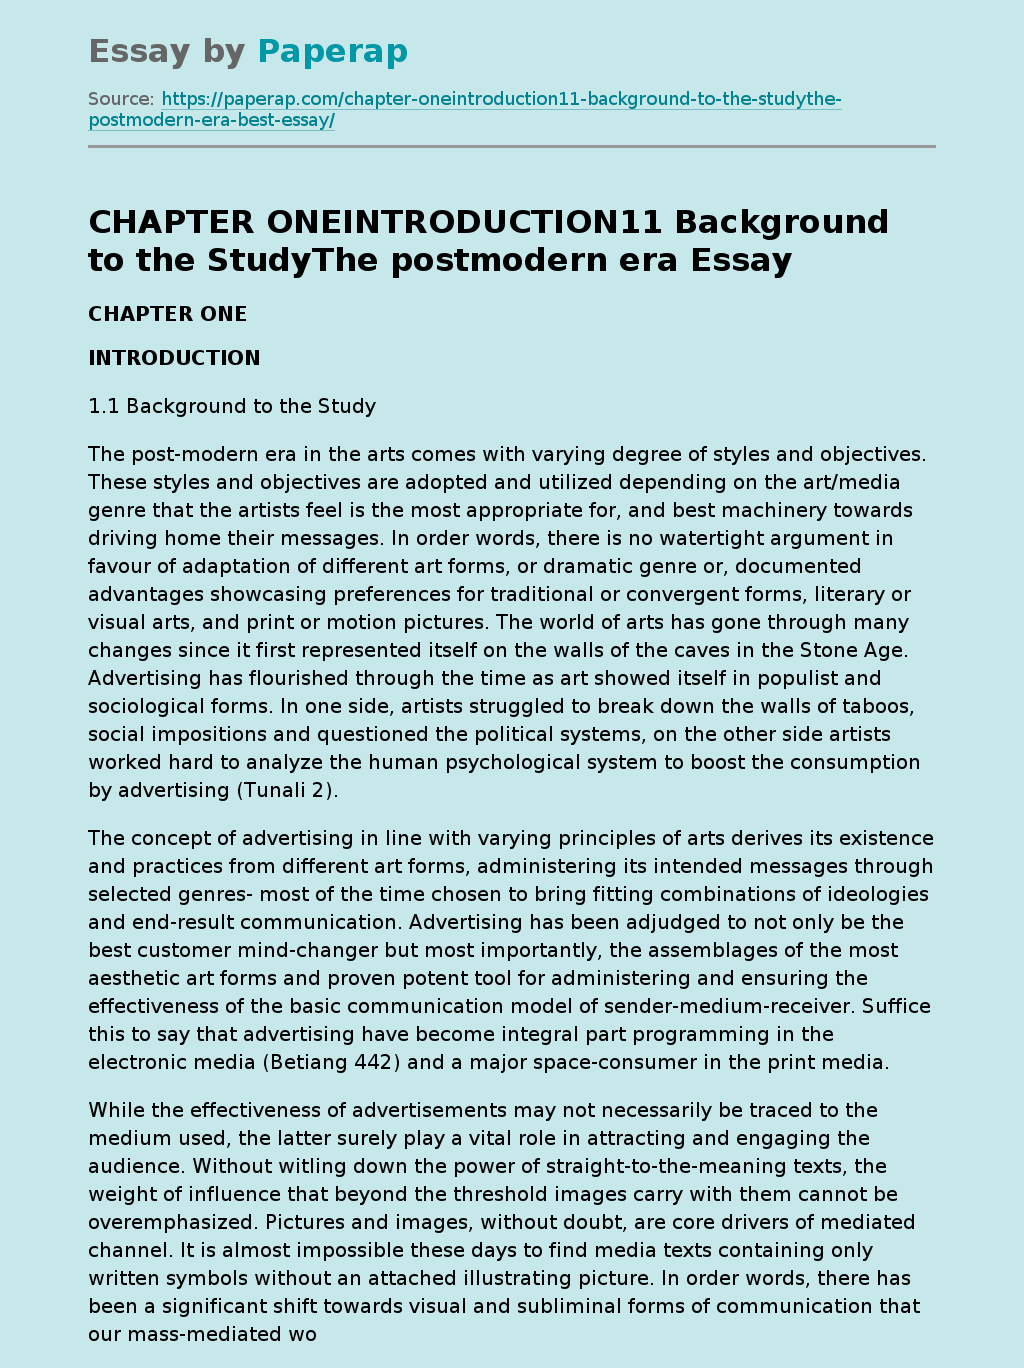 CHAPTER ONEINTRODUCTION11 Background to the StudyThe postmodern era